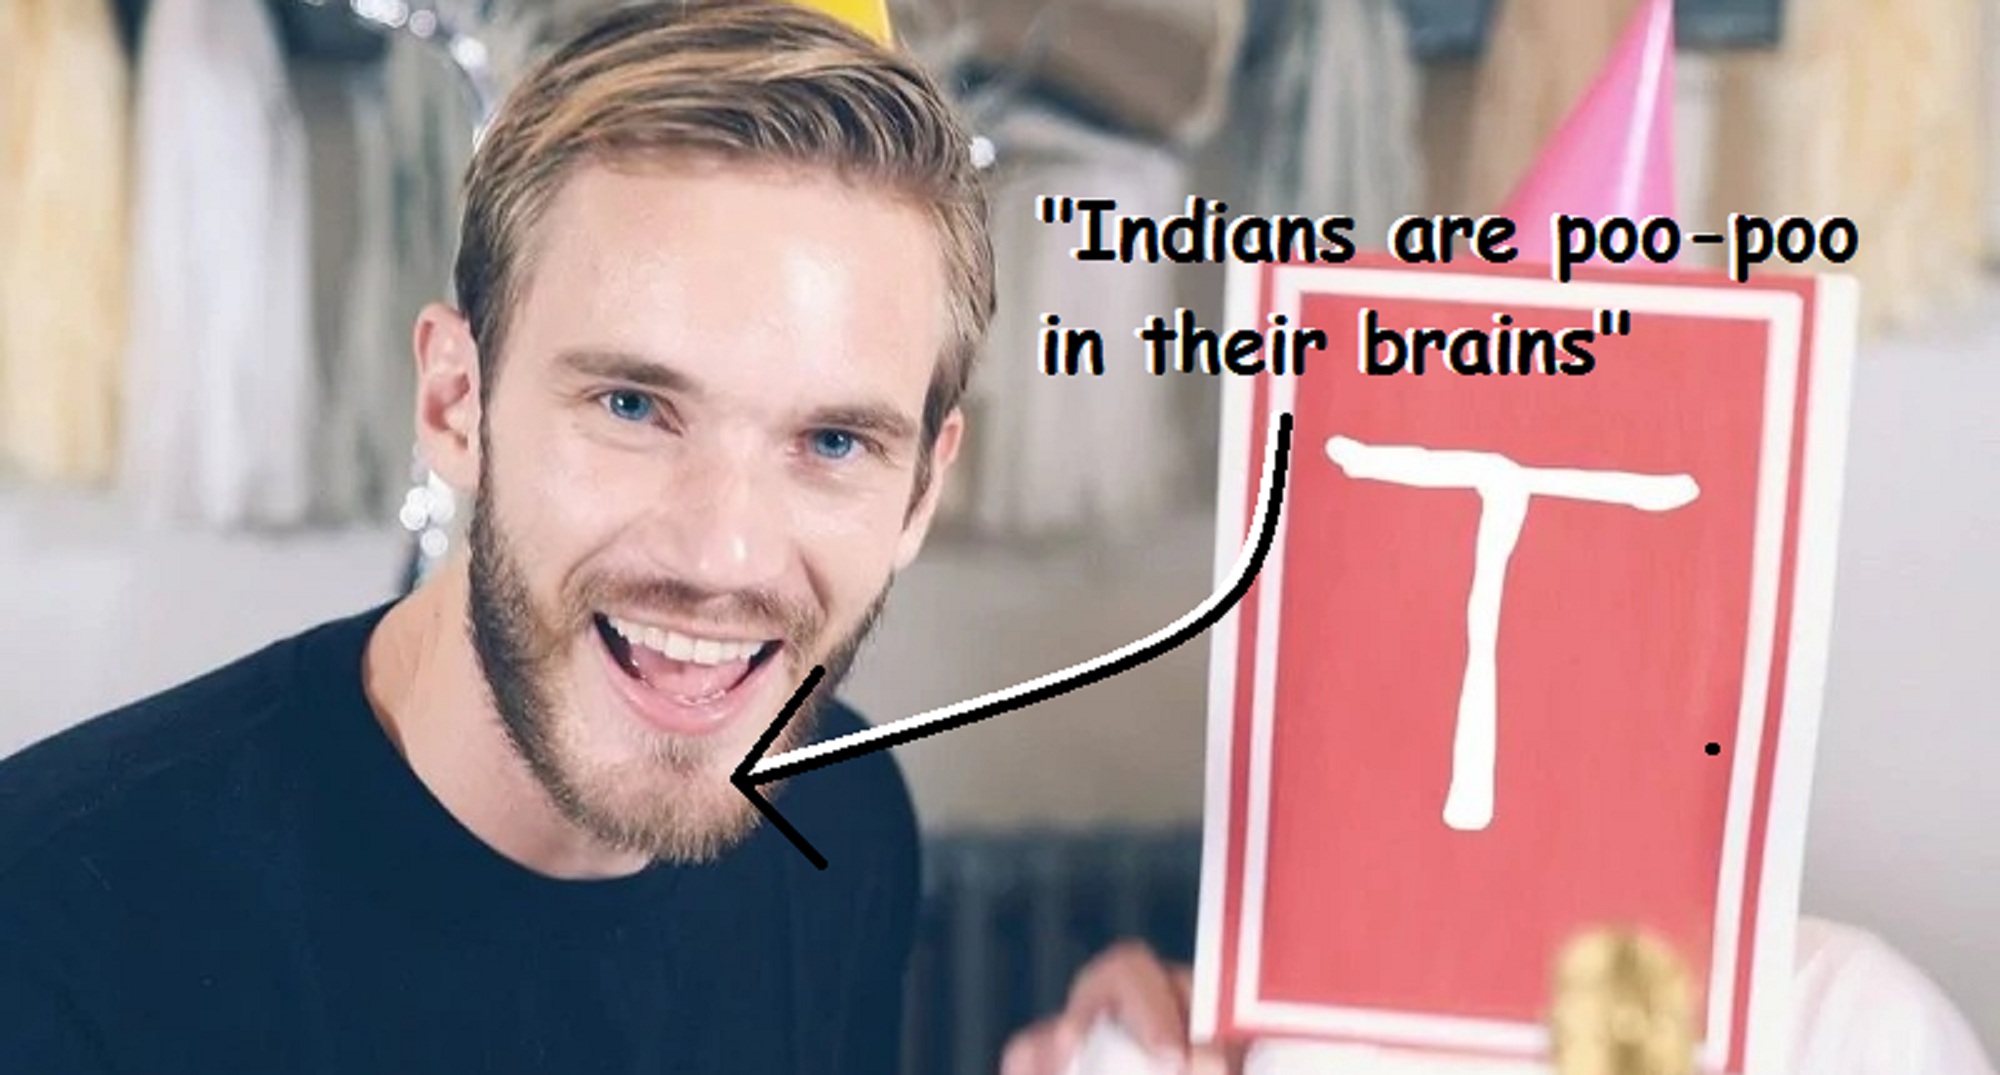 PewDiePie Goes On Racist Rant After T-Series Dethrones Him As ‘Most Subscribed YouTube Channel’